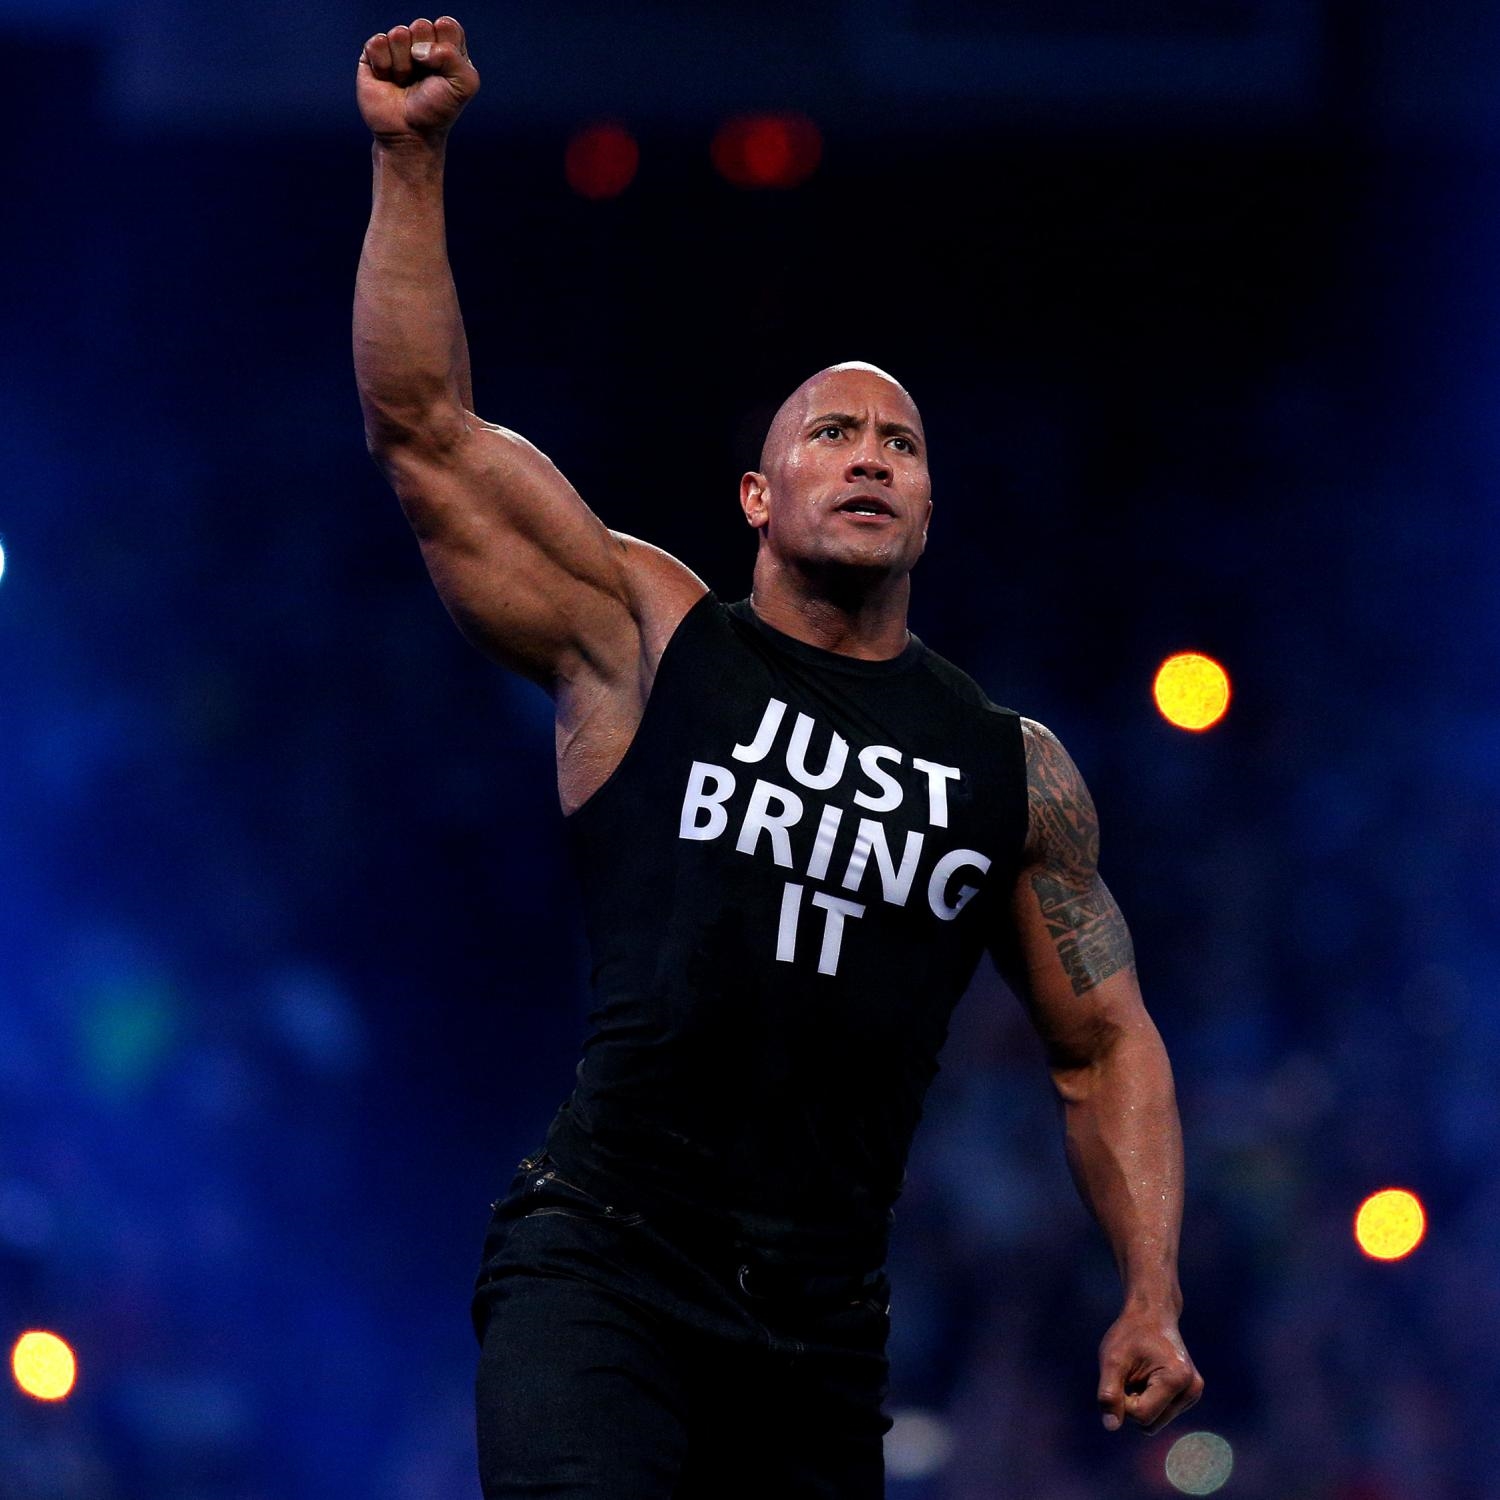 The Rock Hd Wallpapers Free Download Wwe Hd Wallpaper - Rock Wwe - HD Wallpaper 